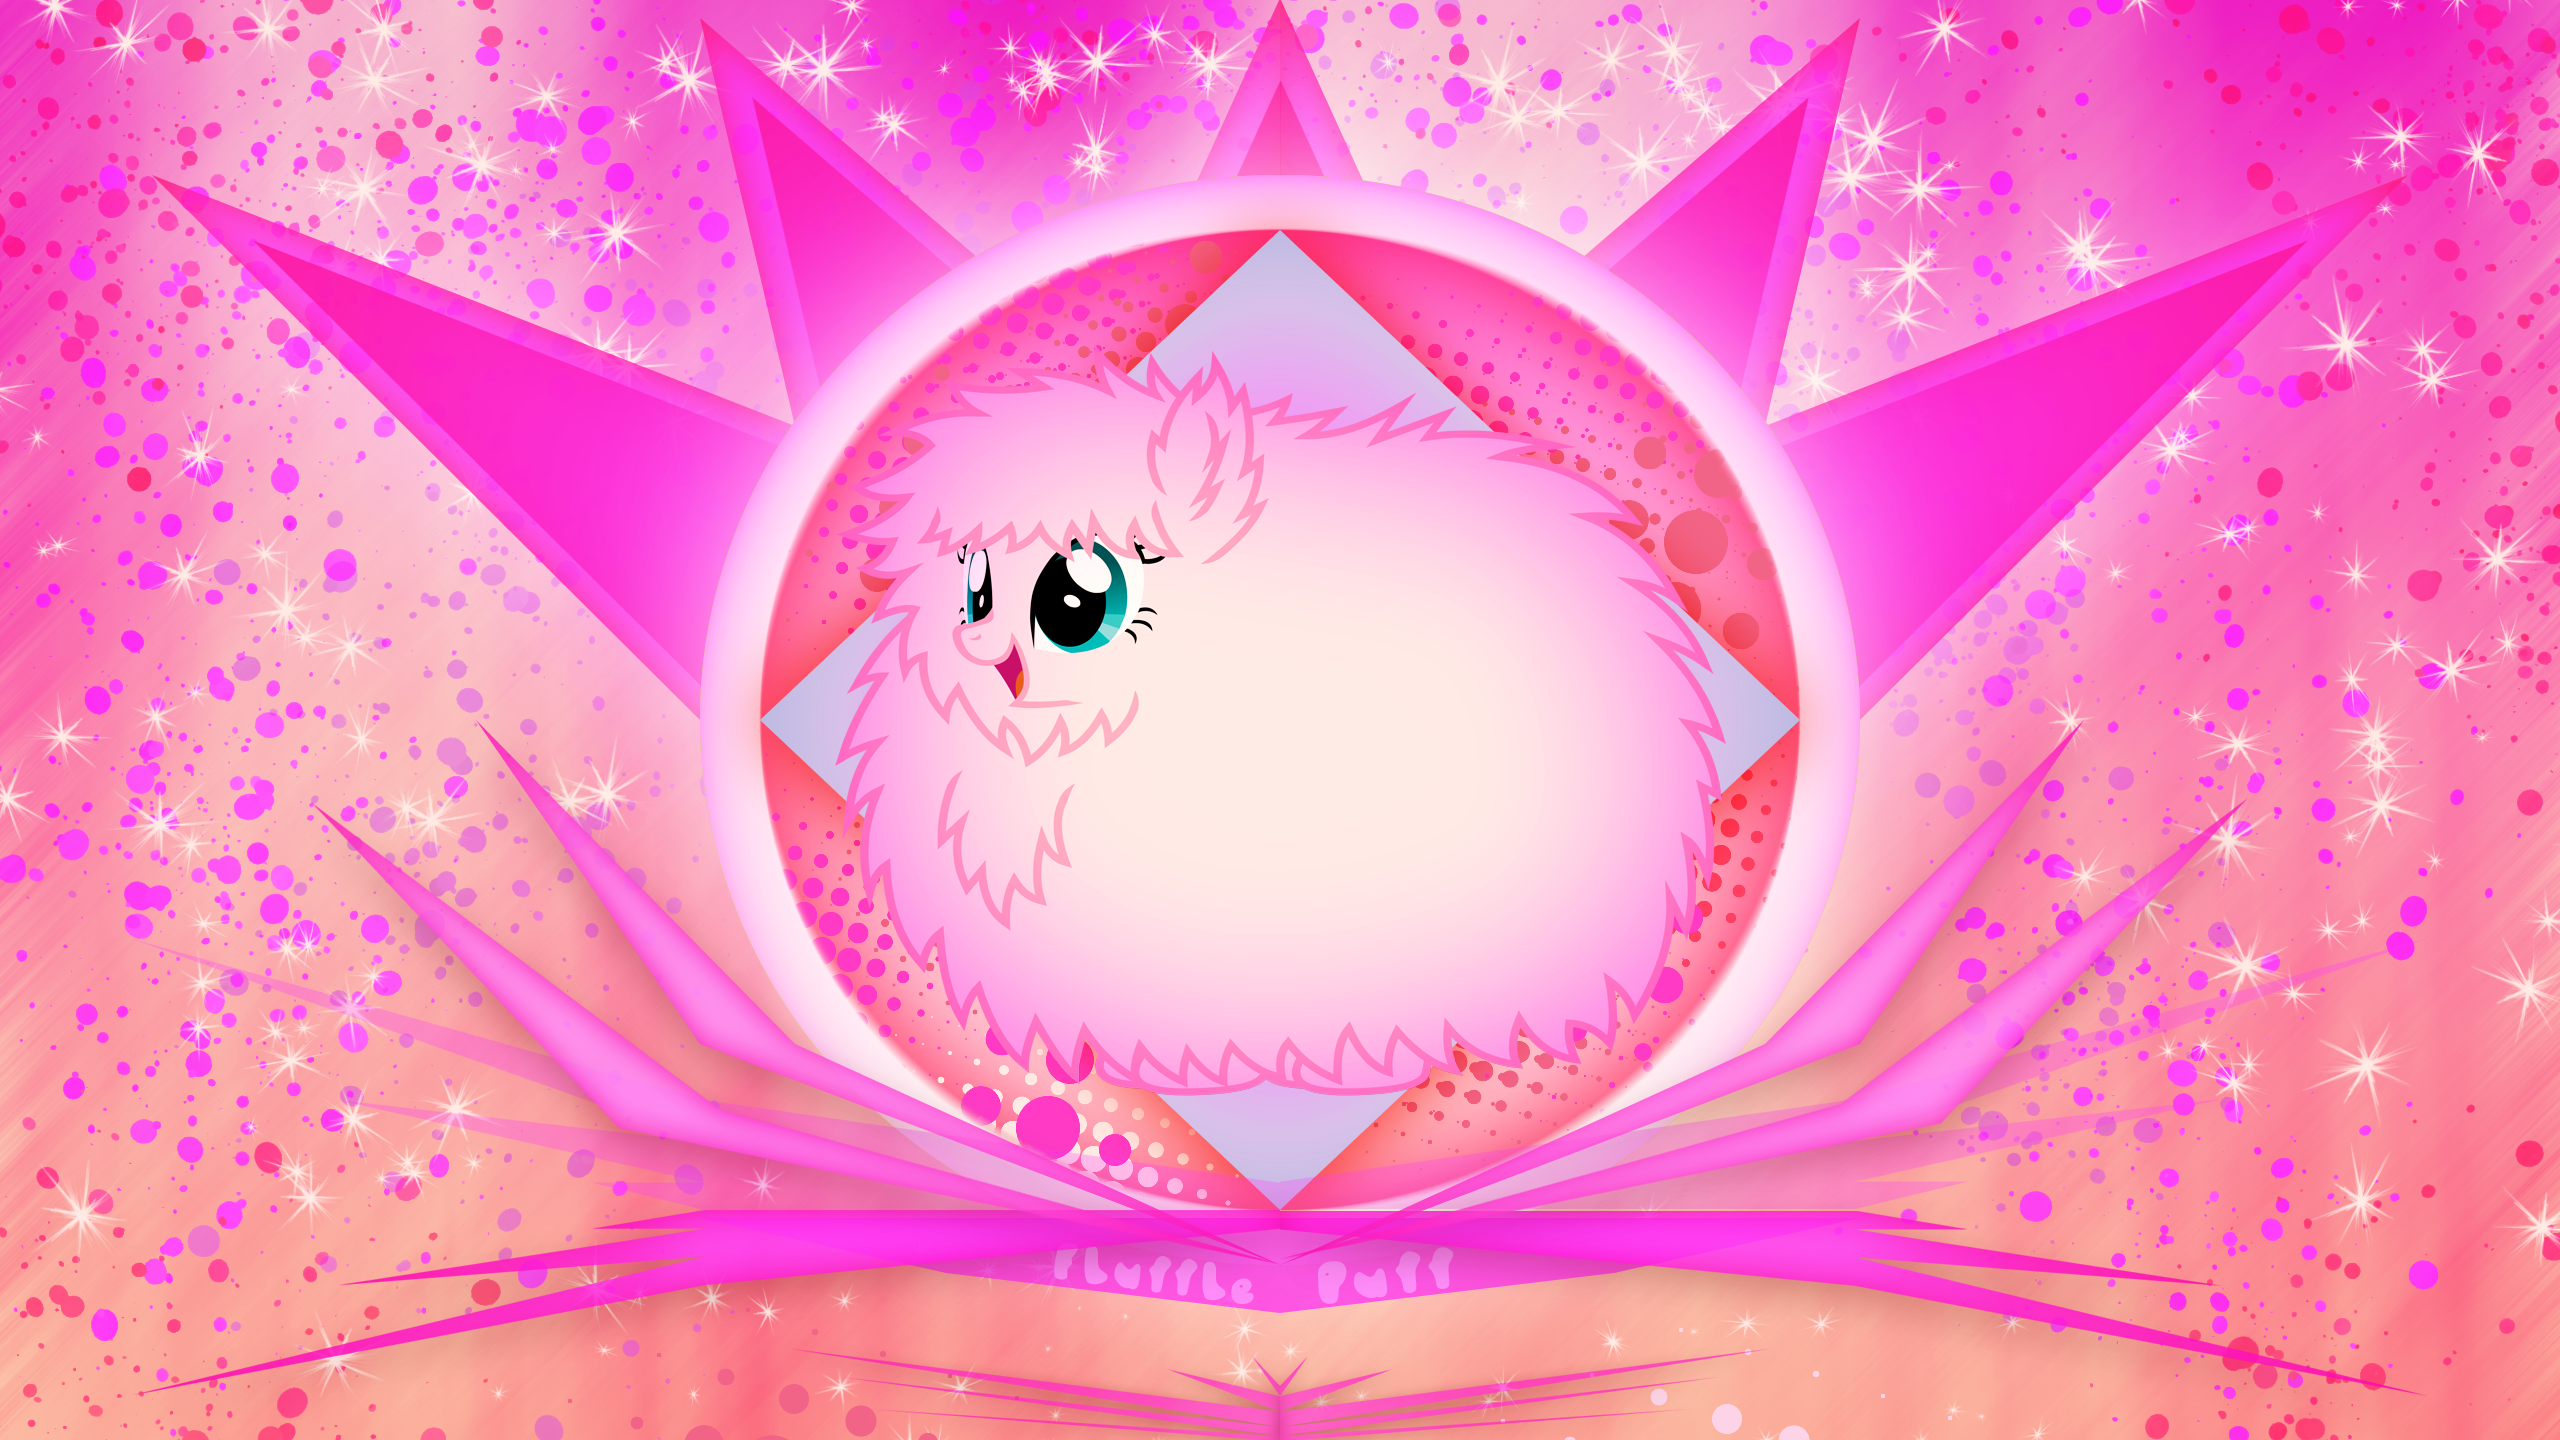 Fluffle Puff wallpaper by skrayp